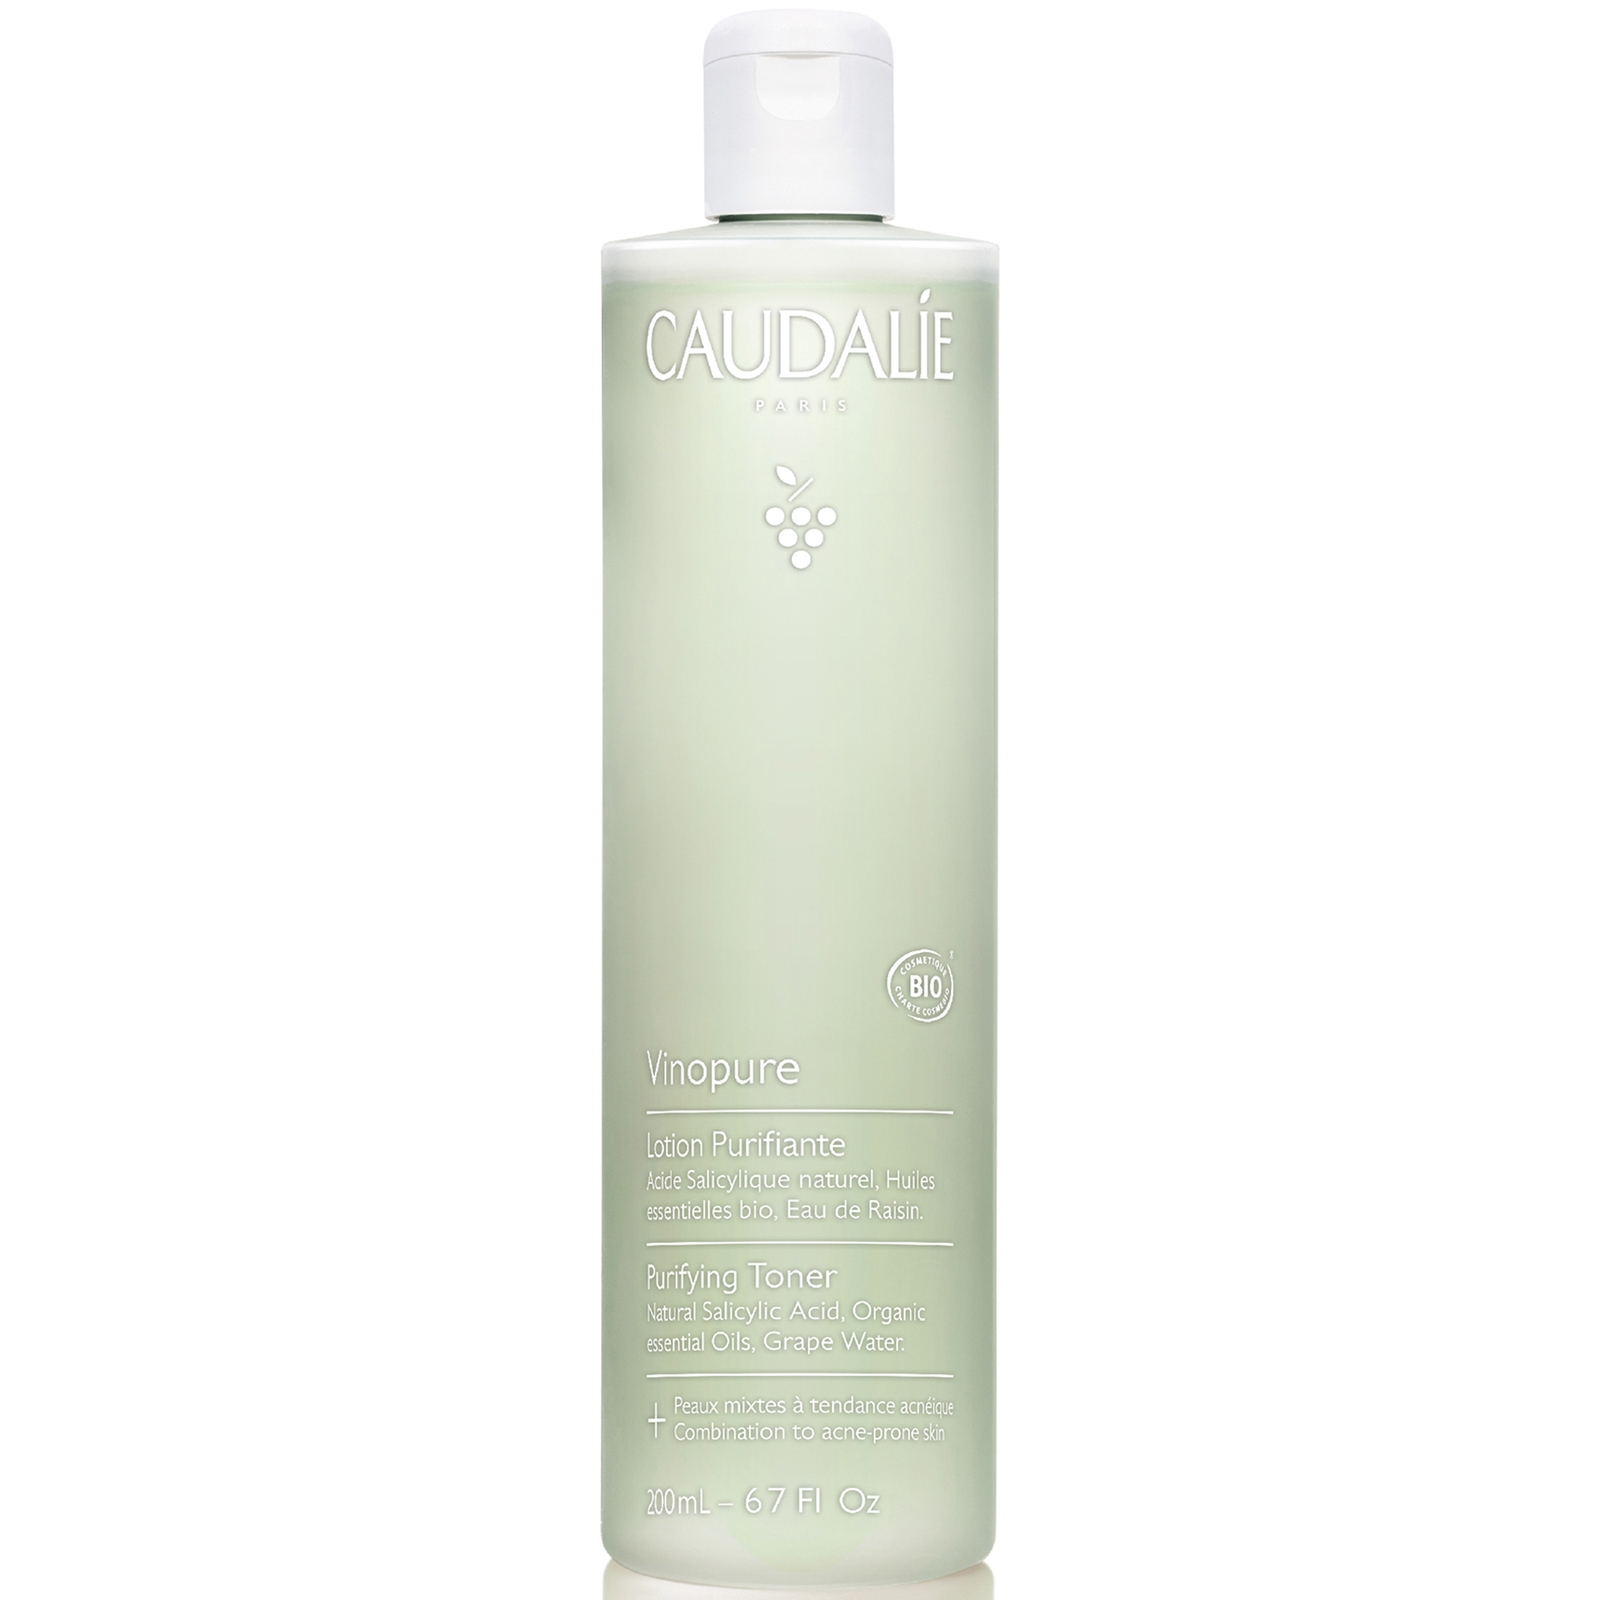 Photos - Facial / Body Cleansing Product Caudalie Vinopure Purifying Toner 200ml 